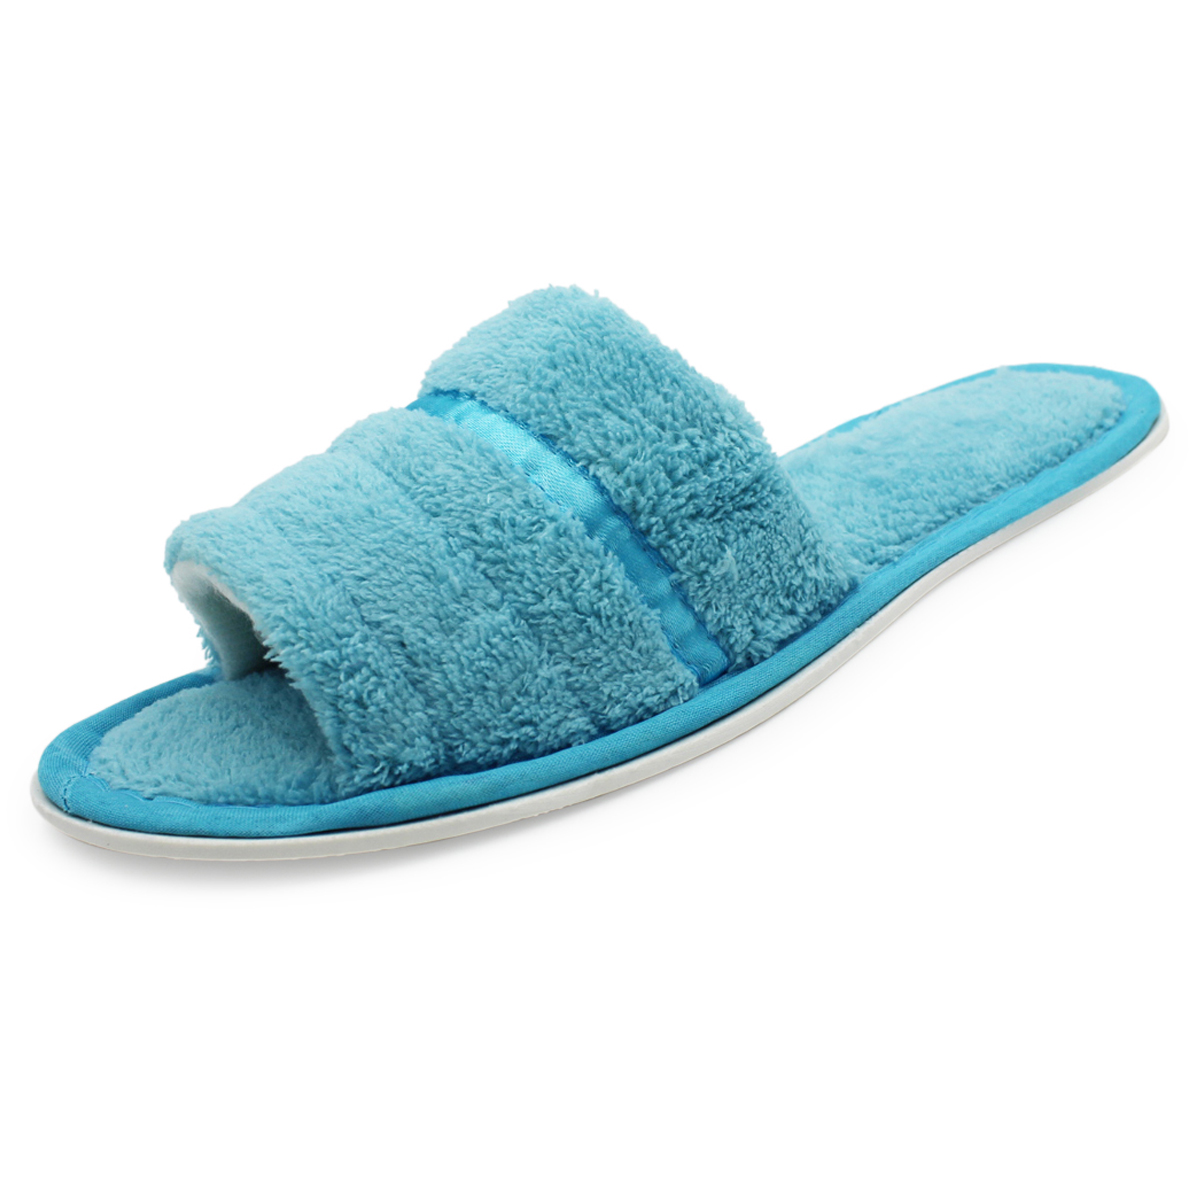 shevalues Terry Cloth Open Toe Slippers for Women Memory Foam Silp On House Slippers 